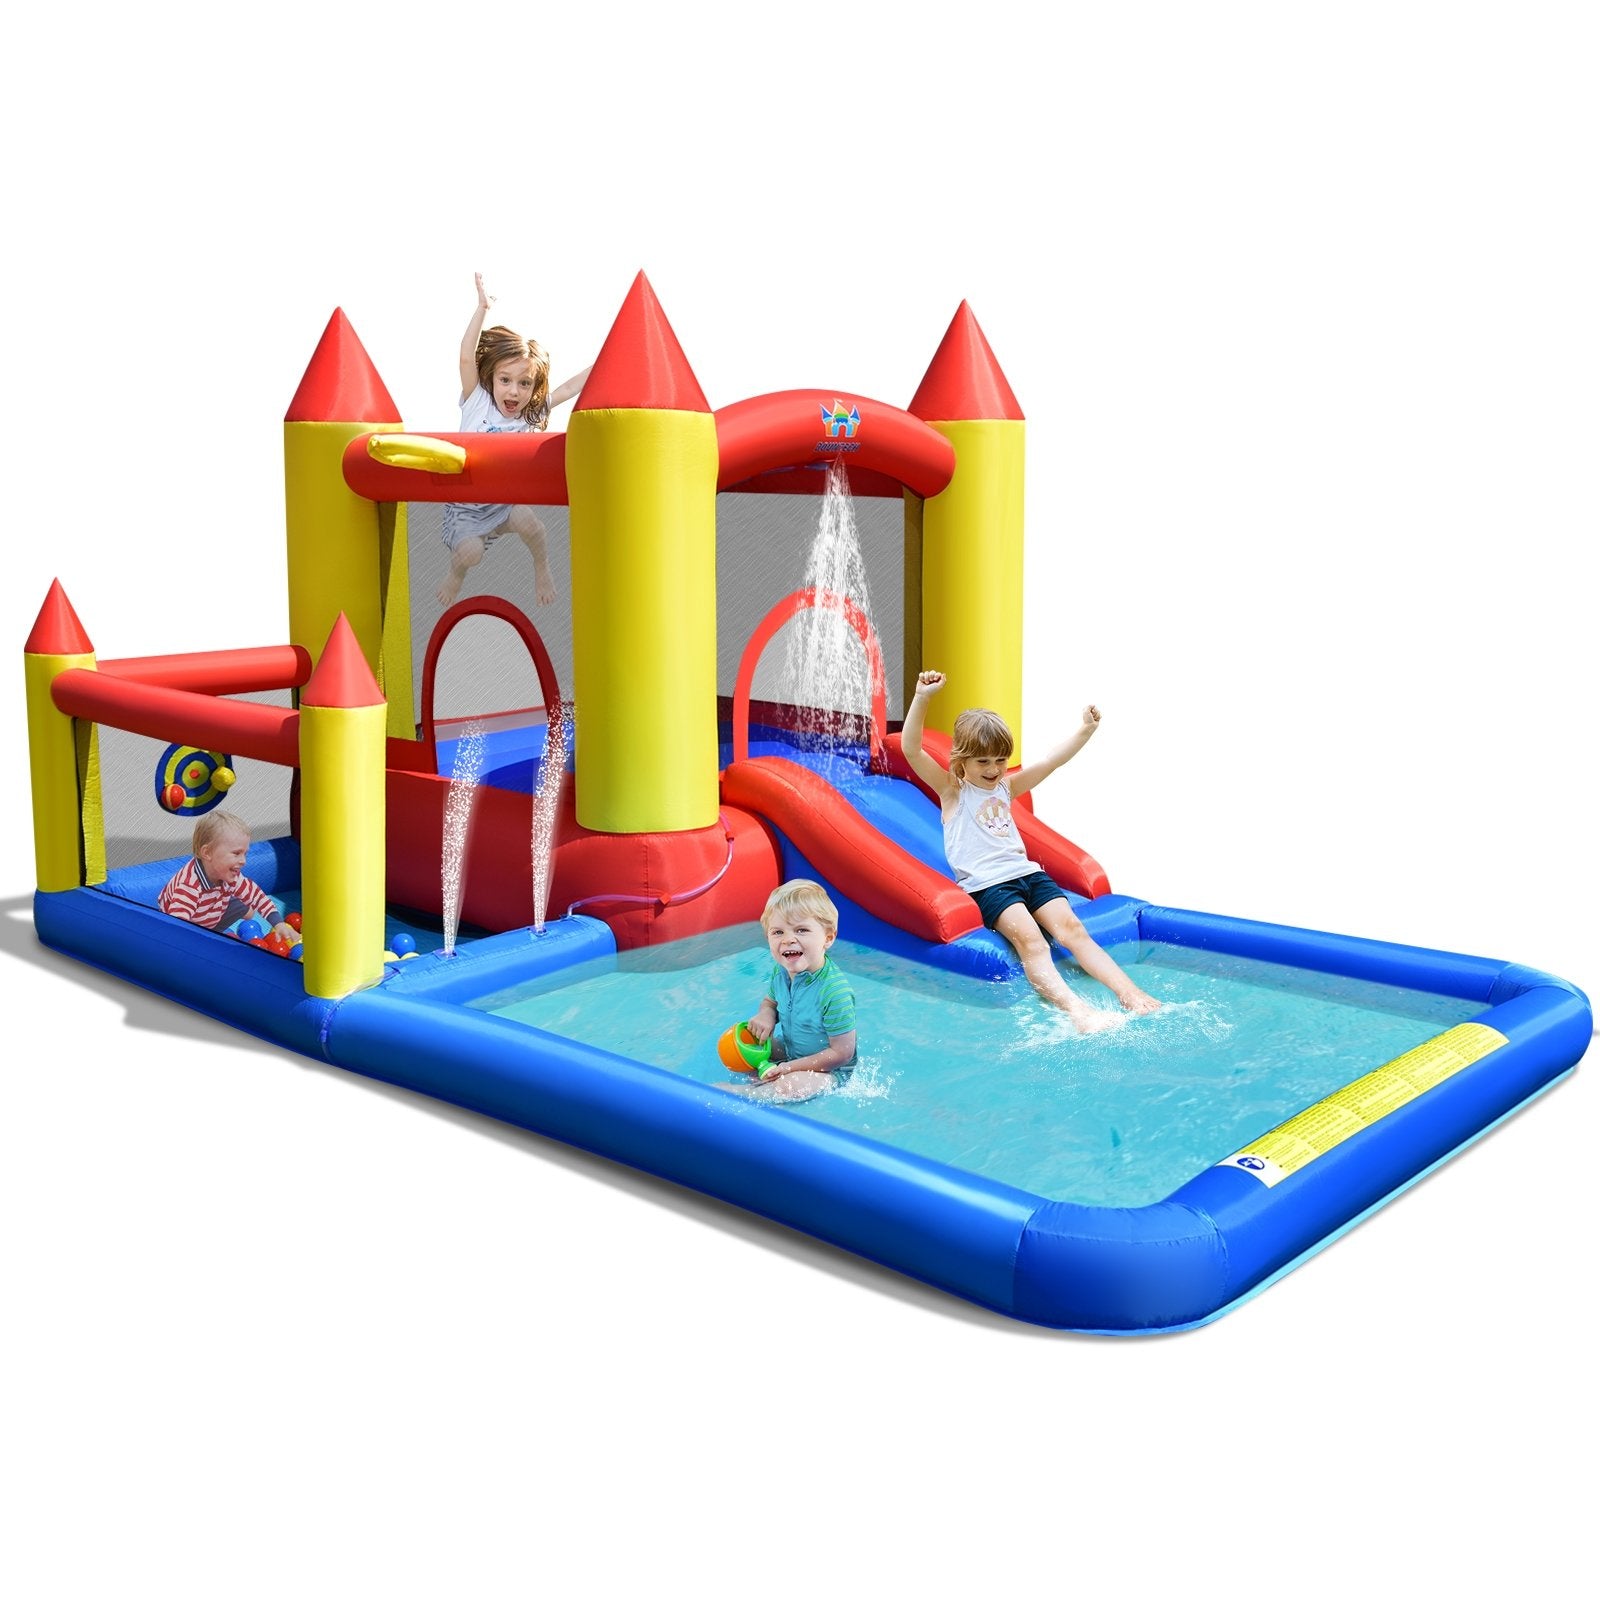 Inflatable Water Slide with Slide and Jumping Area - Gallery Canada